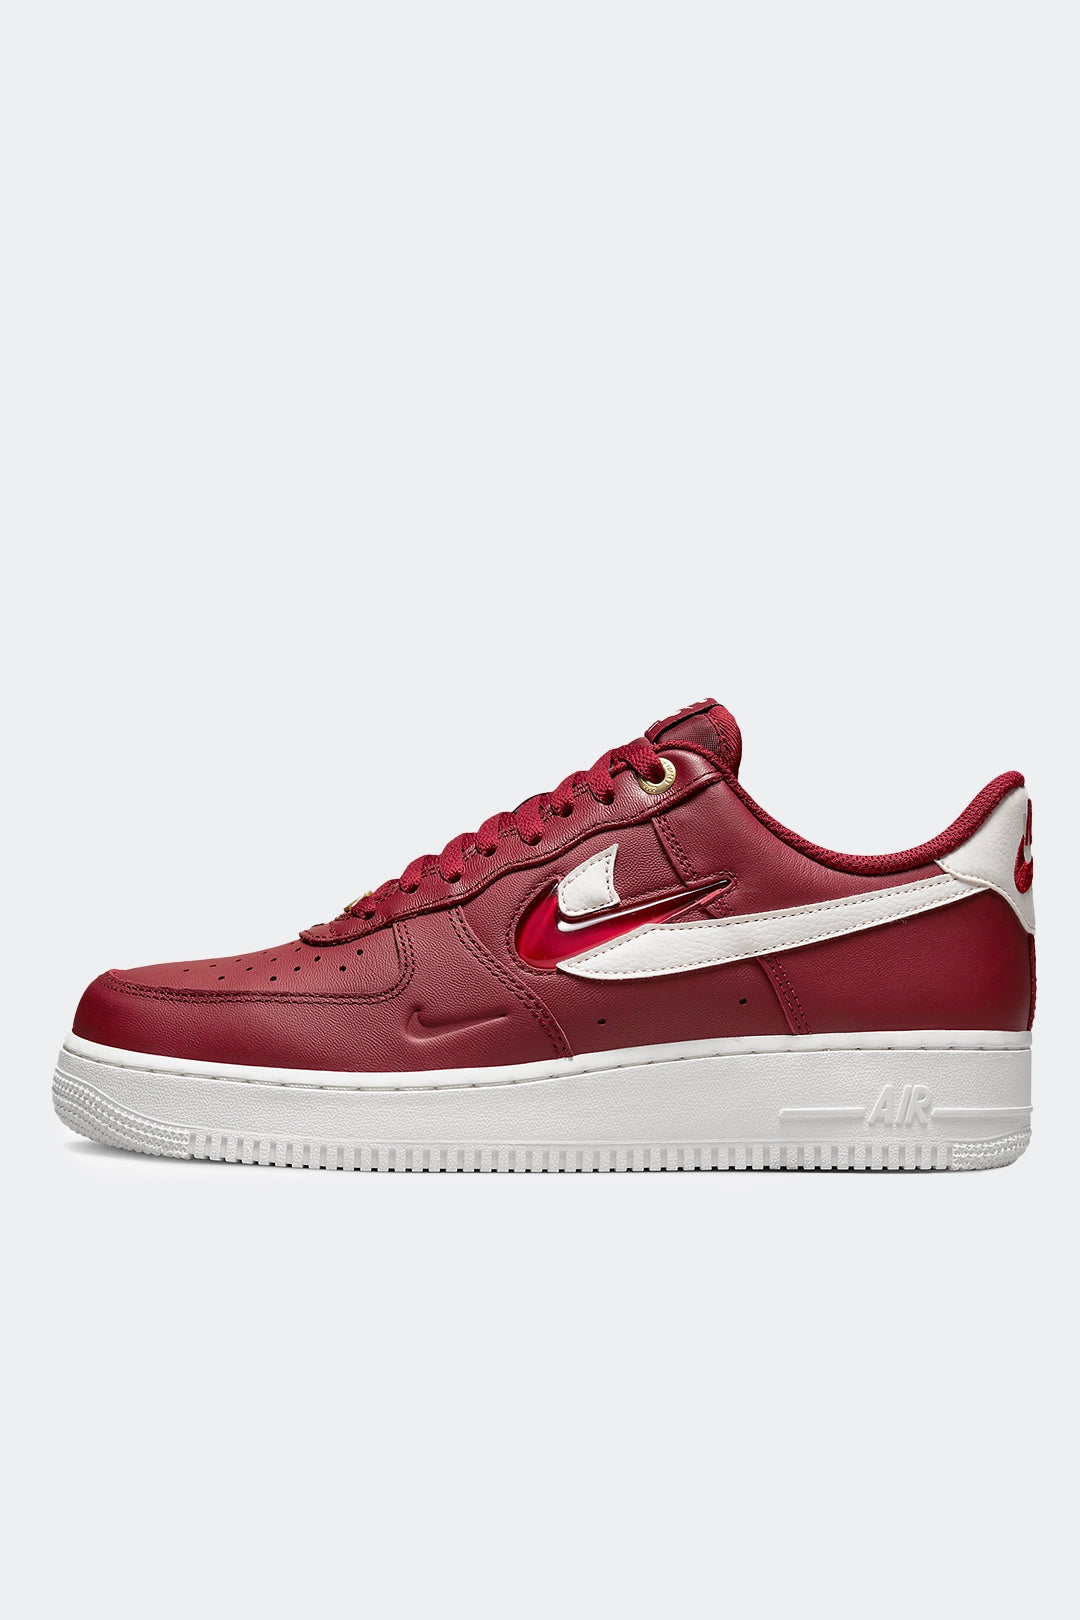 NIKE AIR FORCE 1 '07 PRM 40TH ANIVERSARY "JOIN FORCES" - HYPE